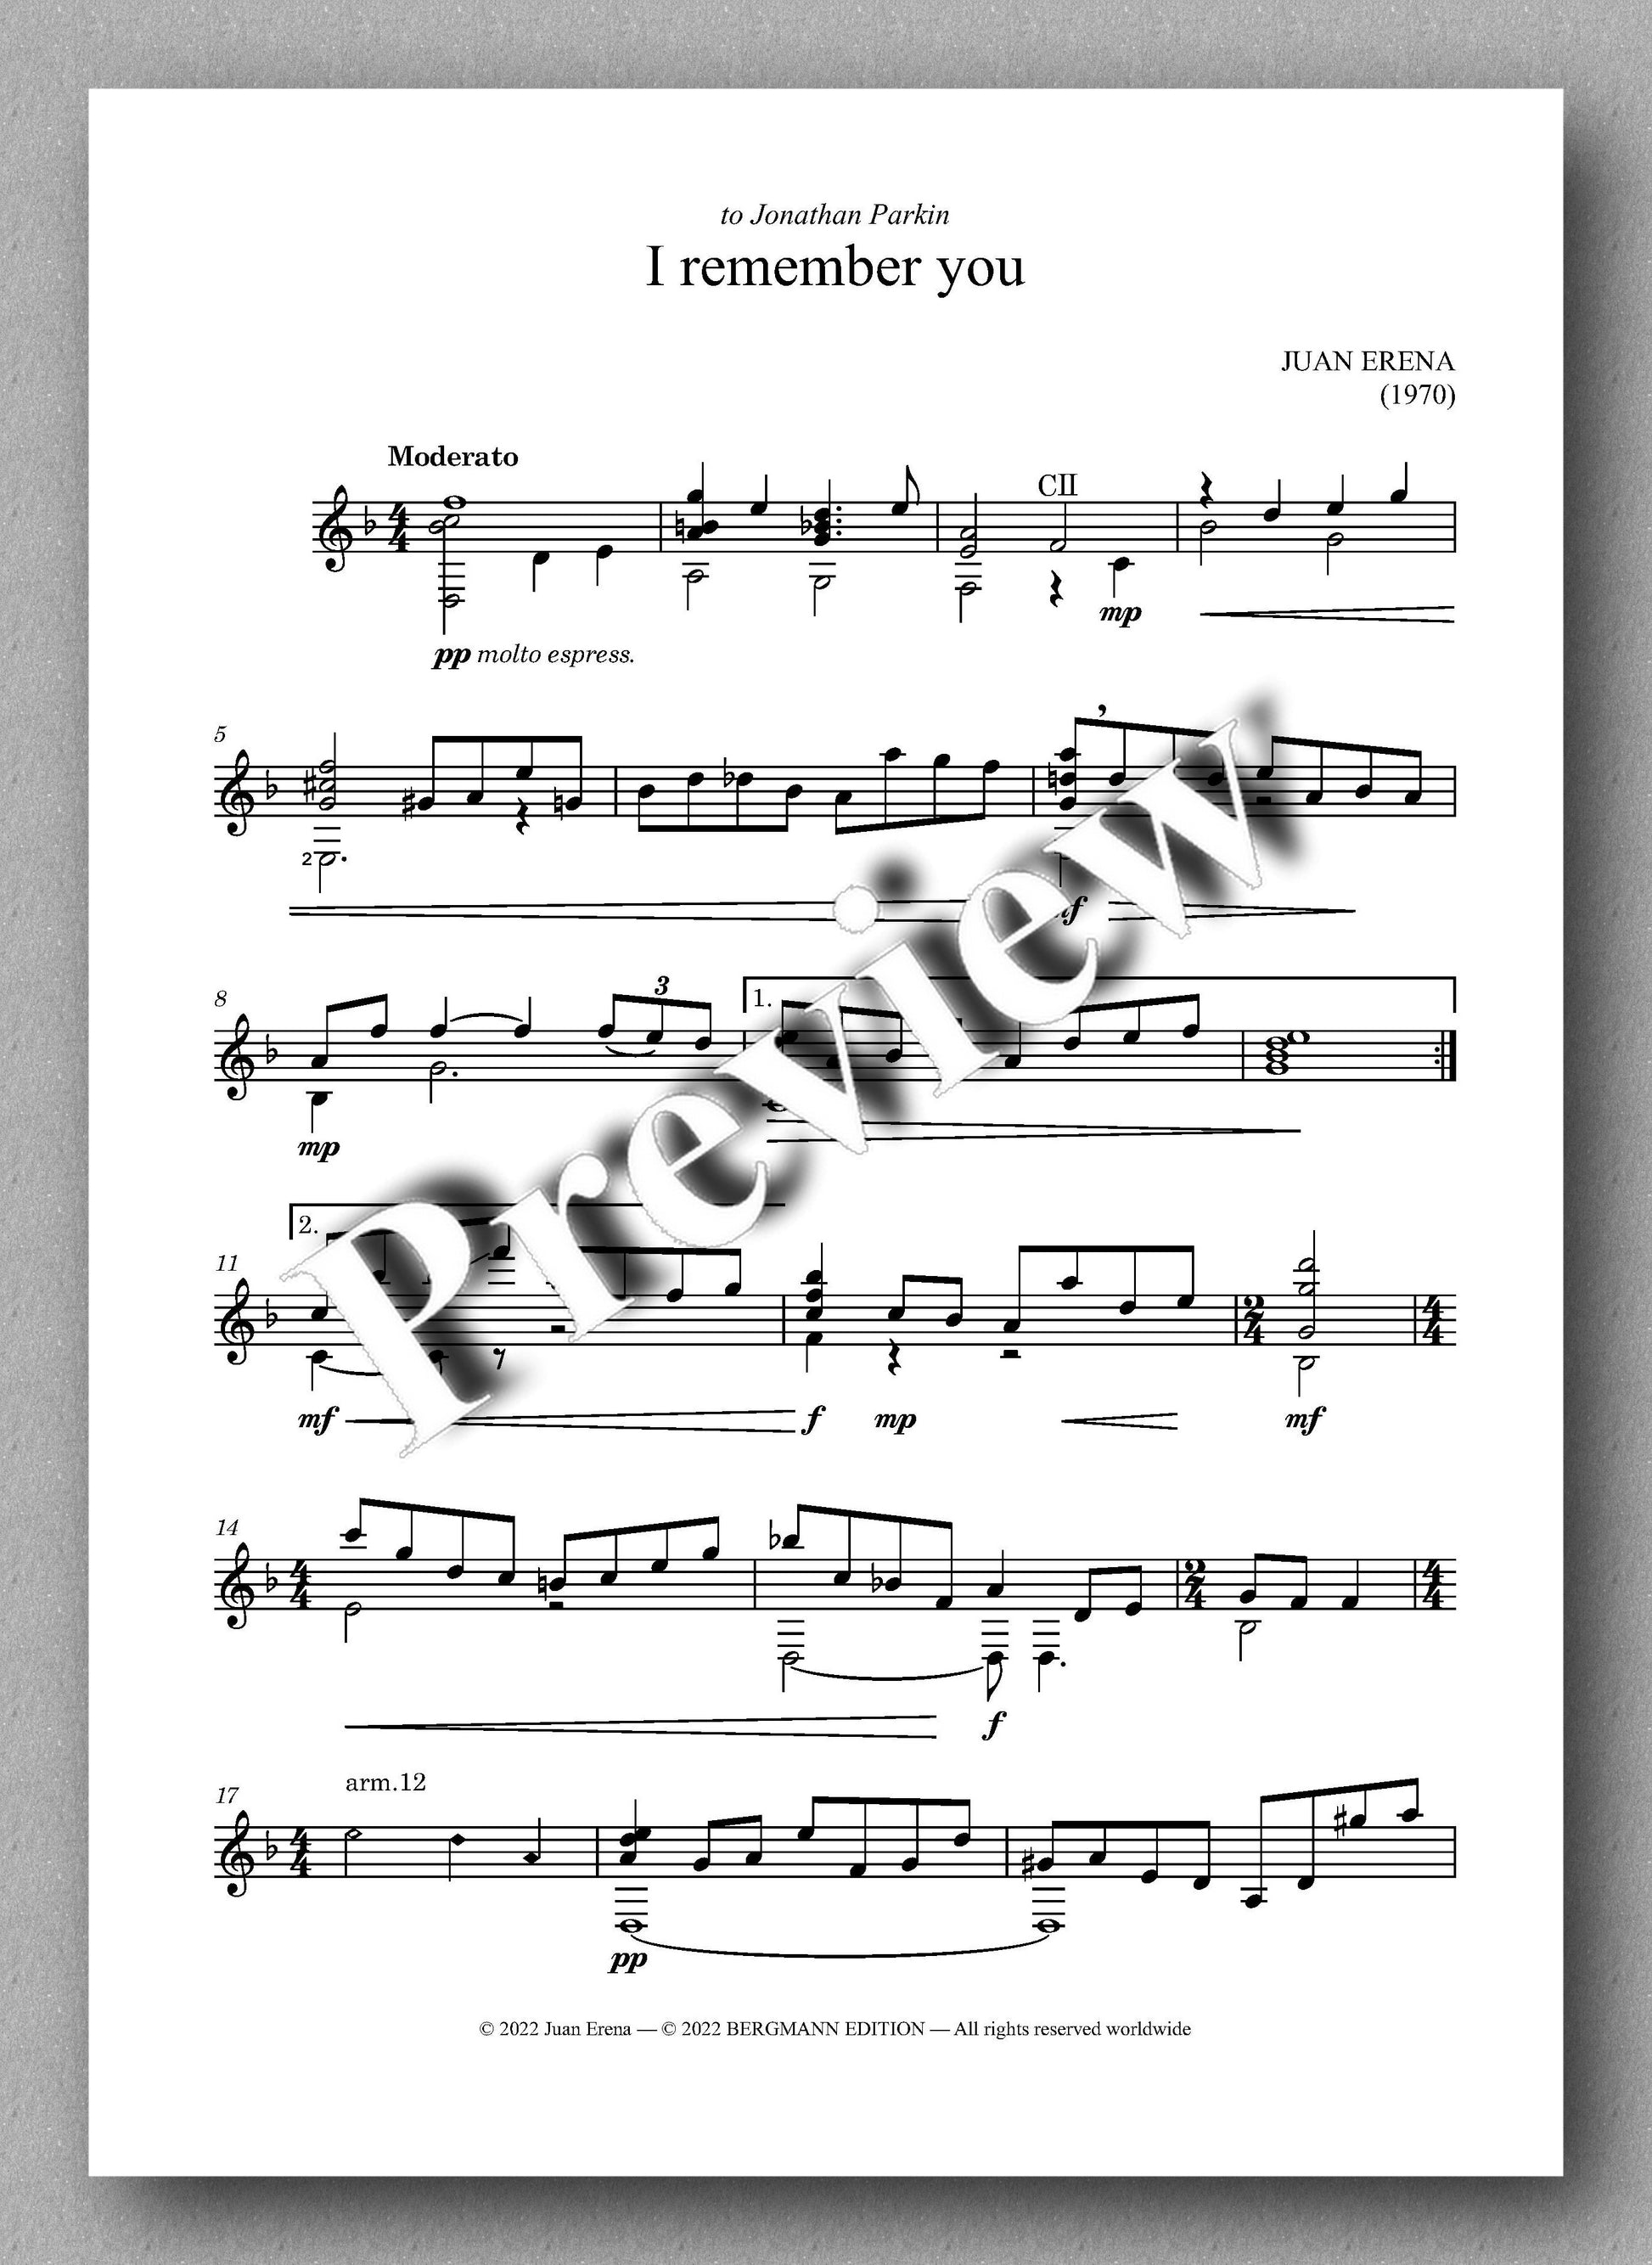 Juan Erena, I Remember You - preview of the music score 1